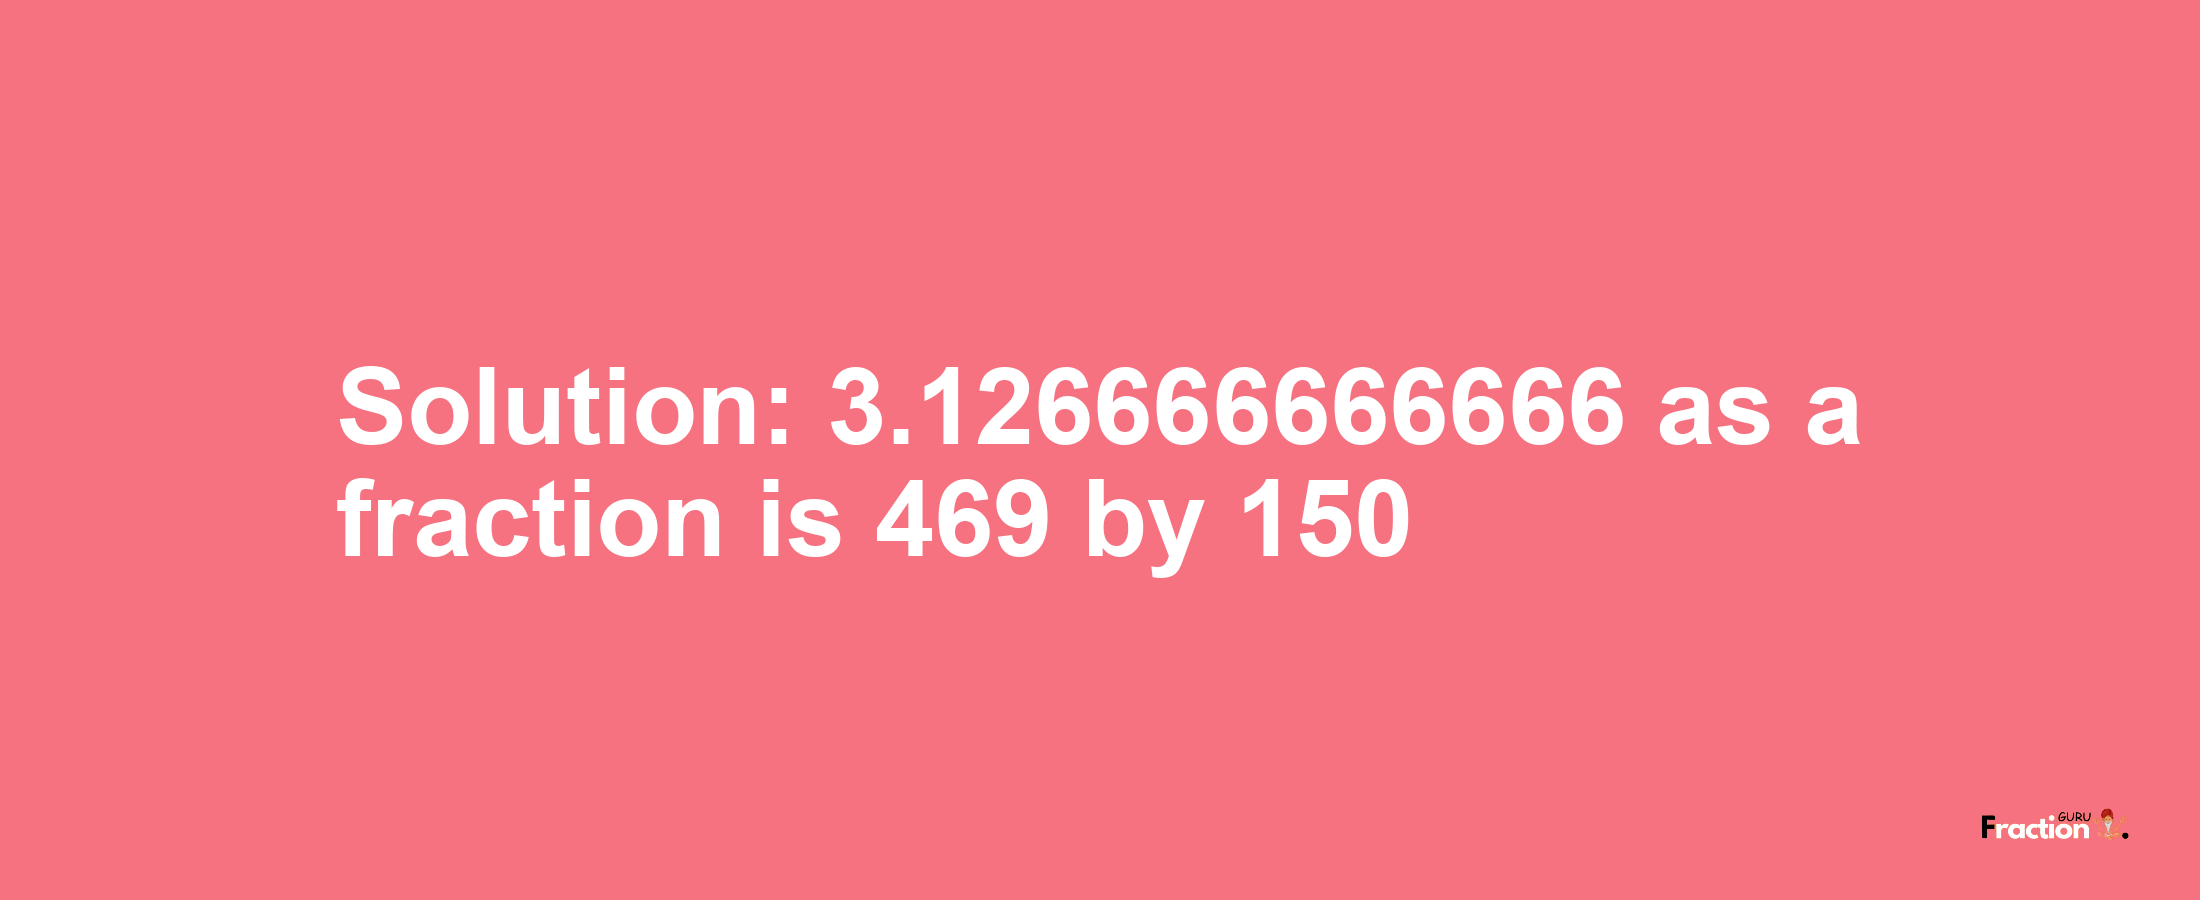 Solution:3.126666666666 as a fraction is 469/150